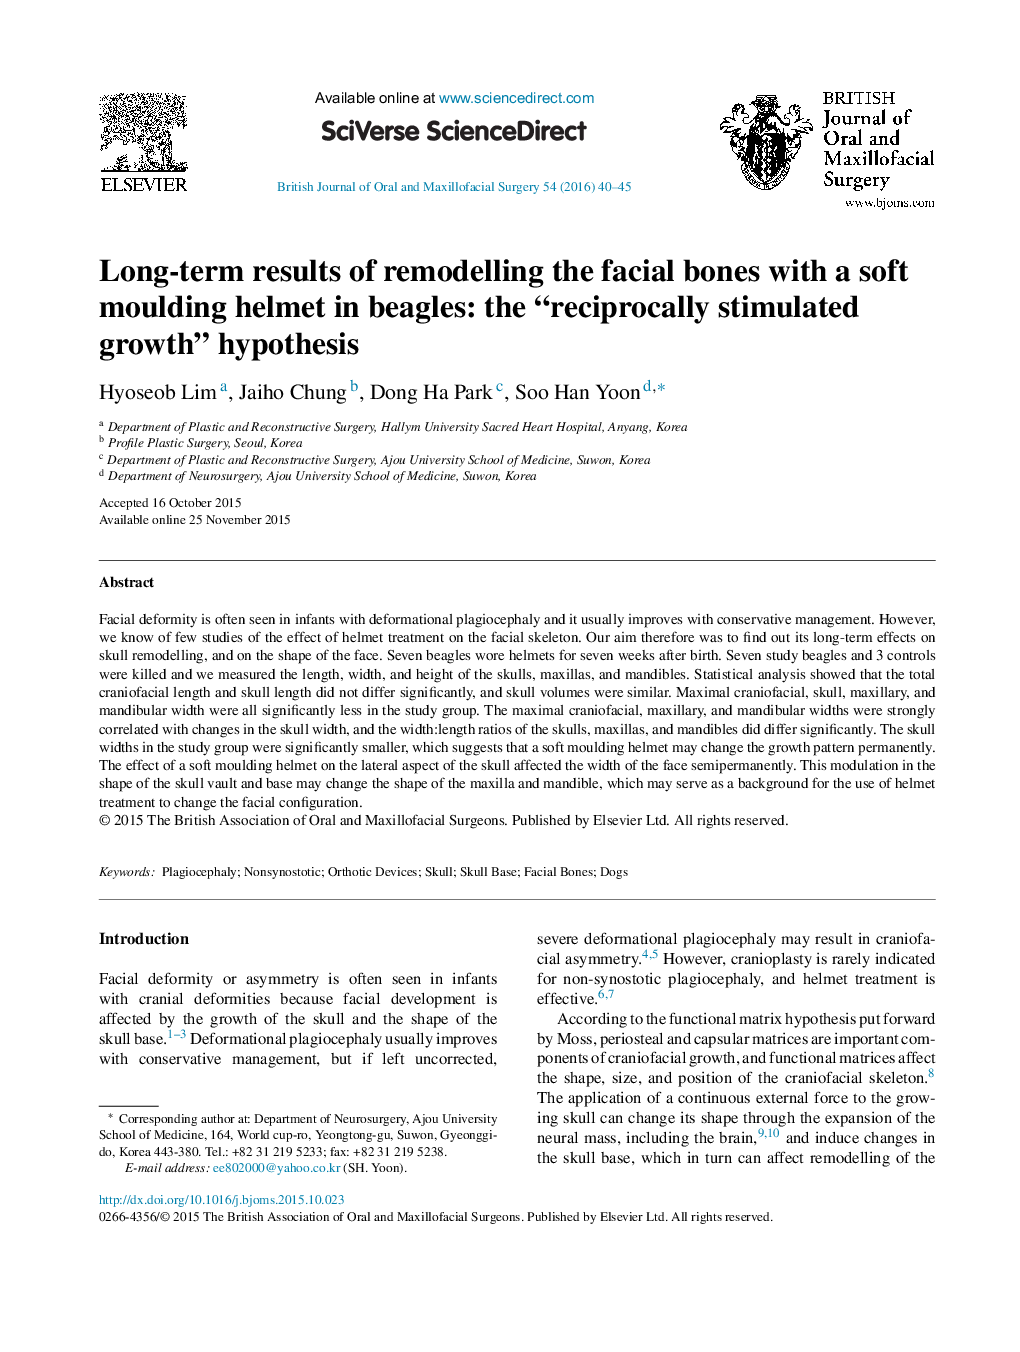 Long-term results of remodelling the facial bones with a soft moulding helmet in beagles: the “reciprocally stimulated growth” hypothesis